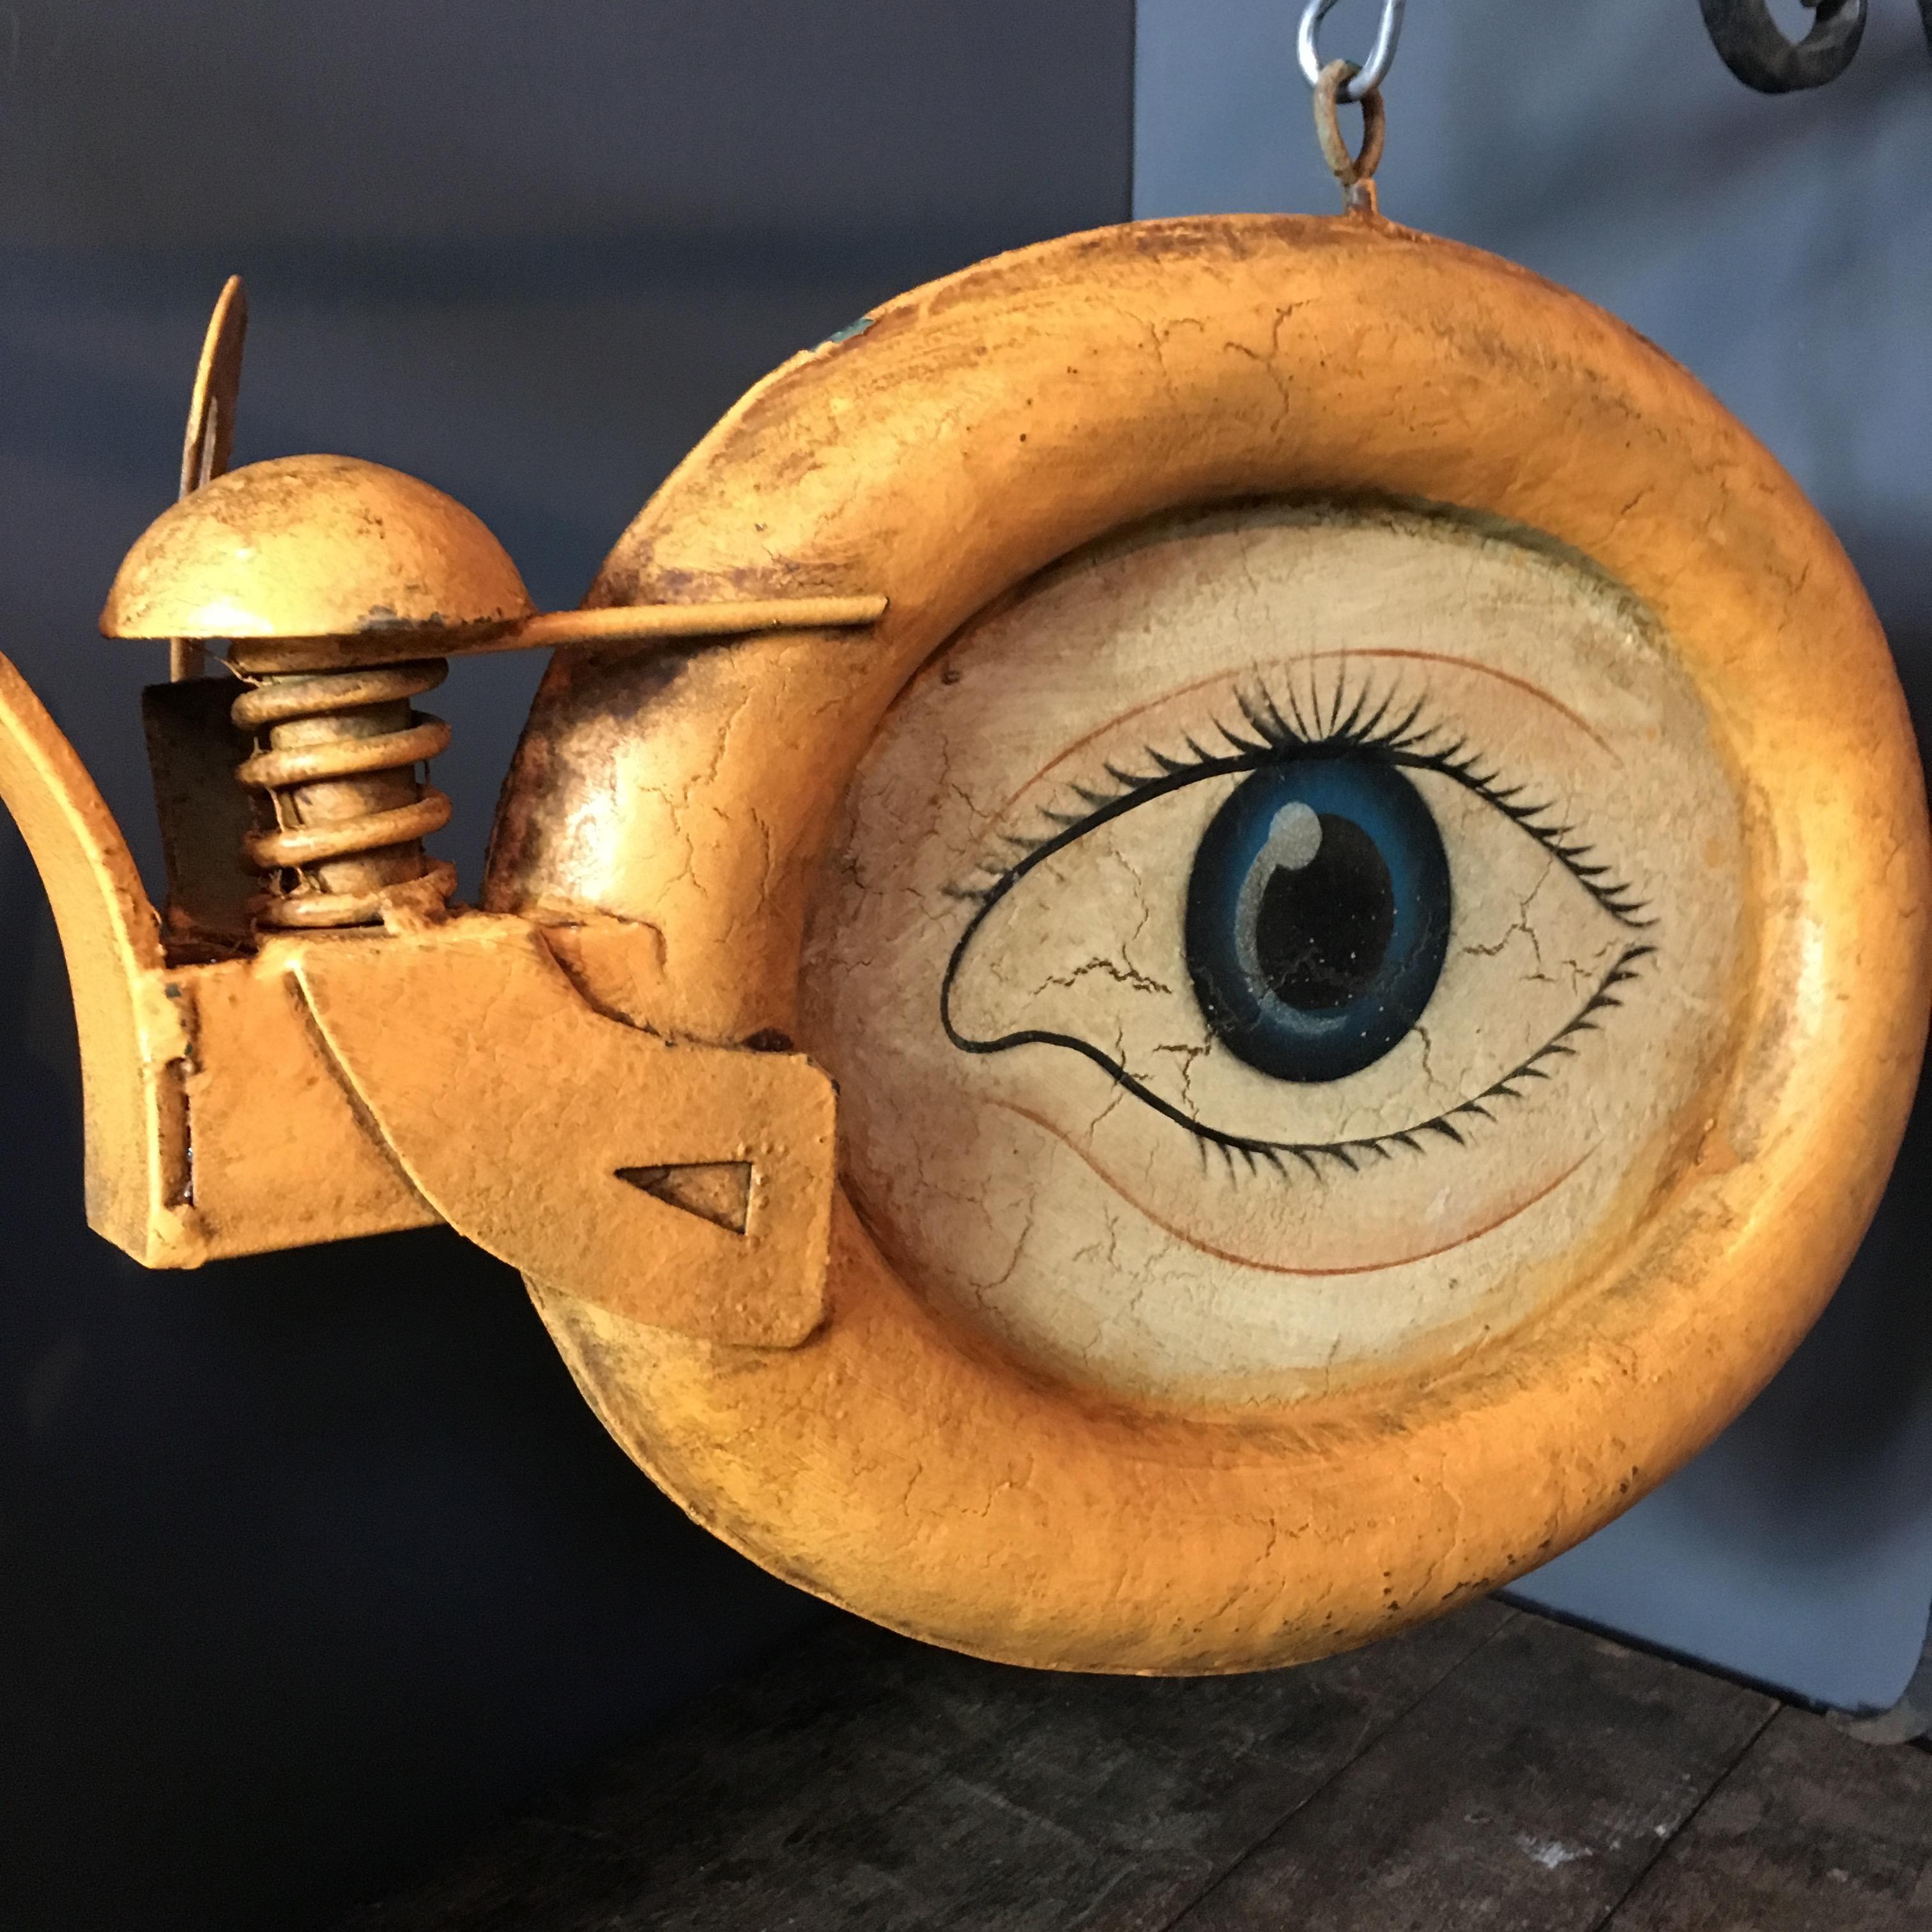 Antique advertising sign for an opticians/optometrist,

circa 1900-1930.

Double sided big cast zinc glasses with four hand-painted eyes.

The eyes hang on the original adjustable iron wall bracket.

Rare and collectable item.